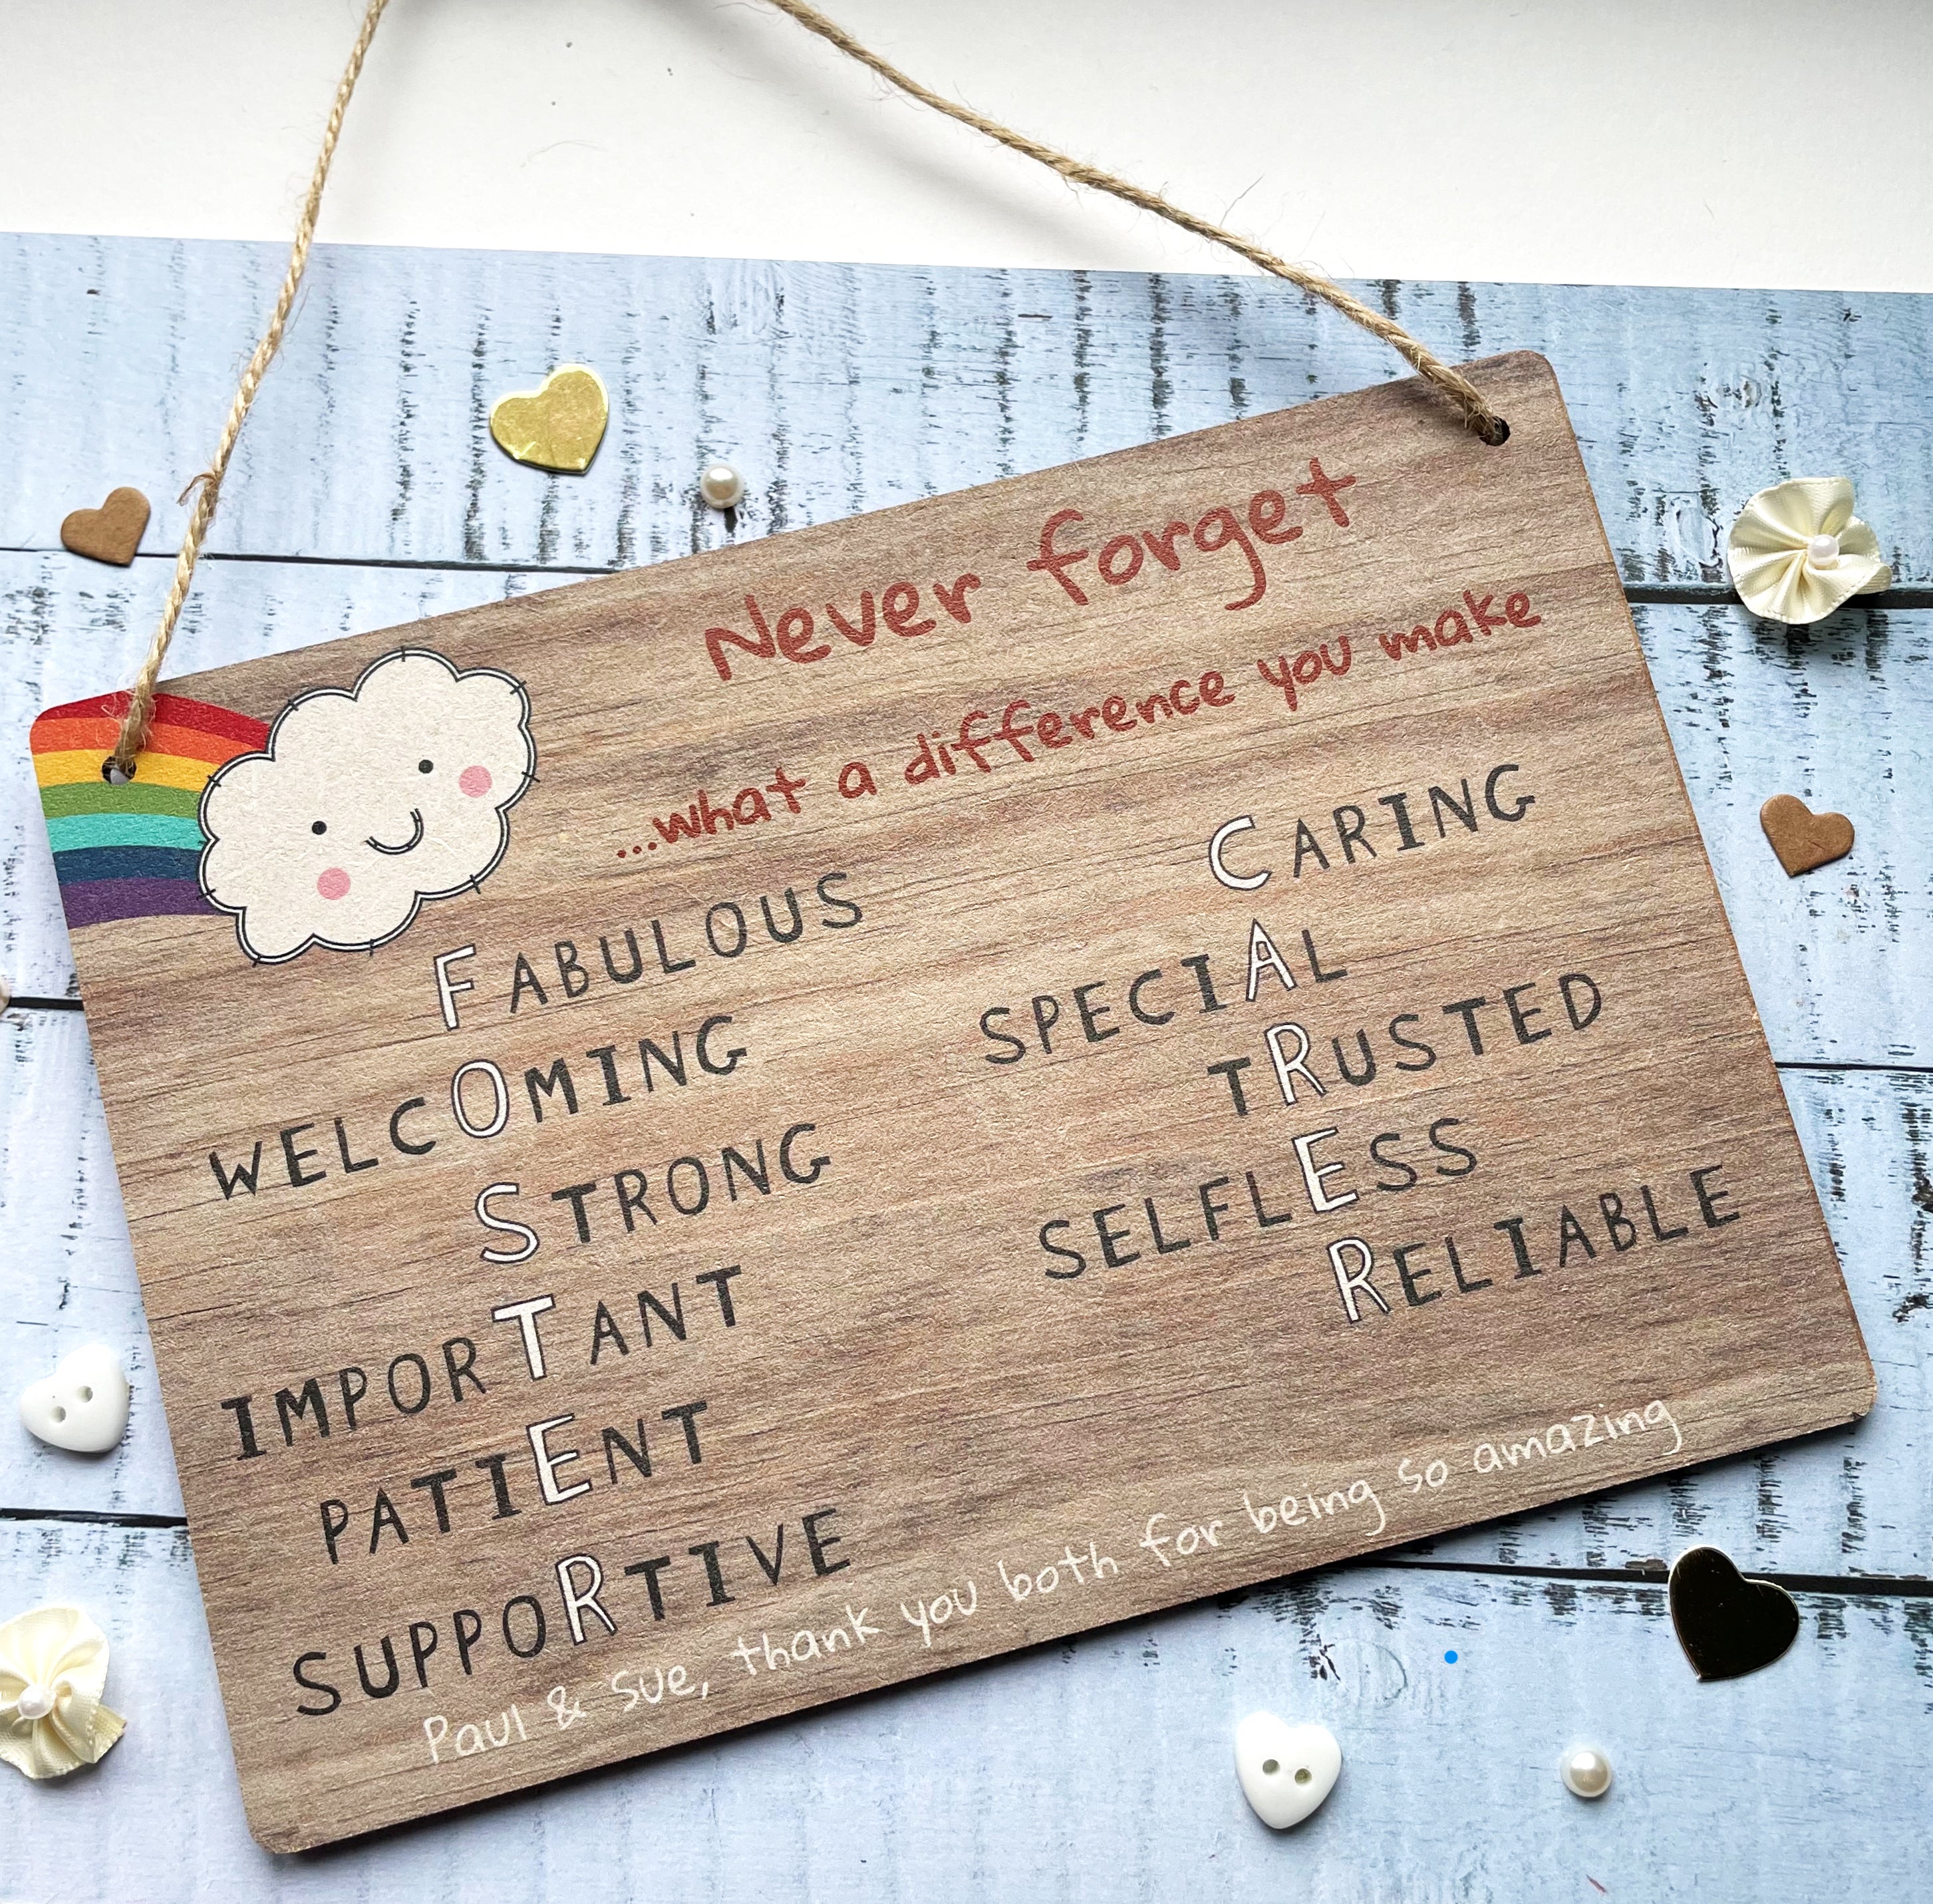 Foster Carer Thank You Gifts - Personalised Rainbow Plaque